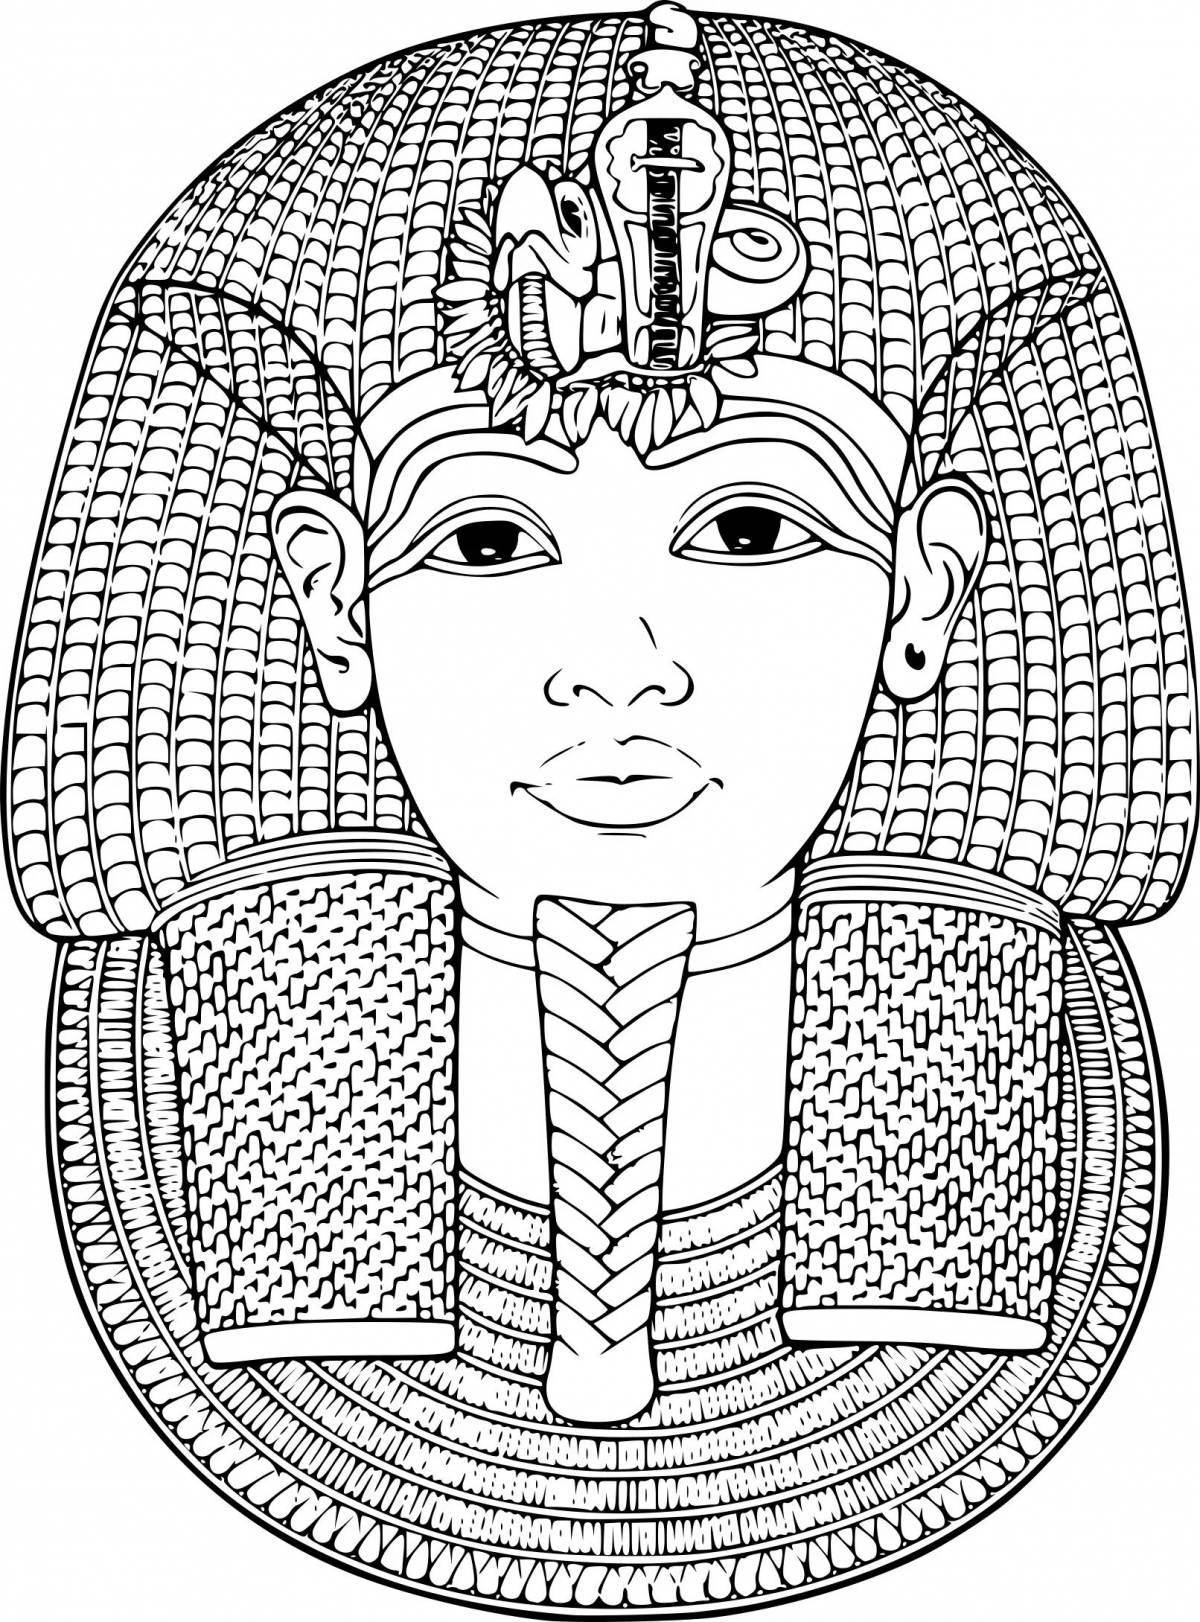 An ornate ancient egypt coloring book